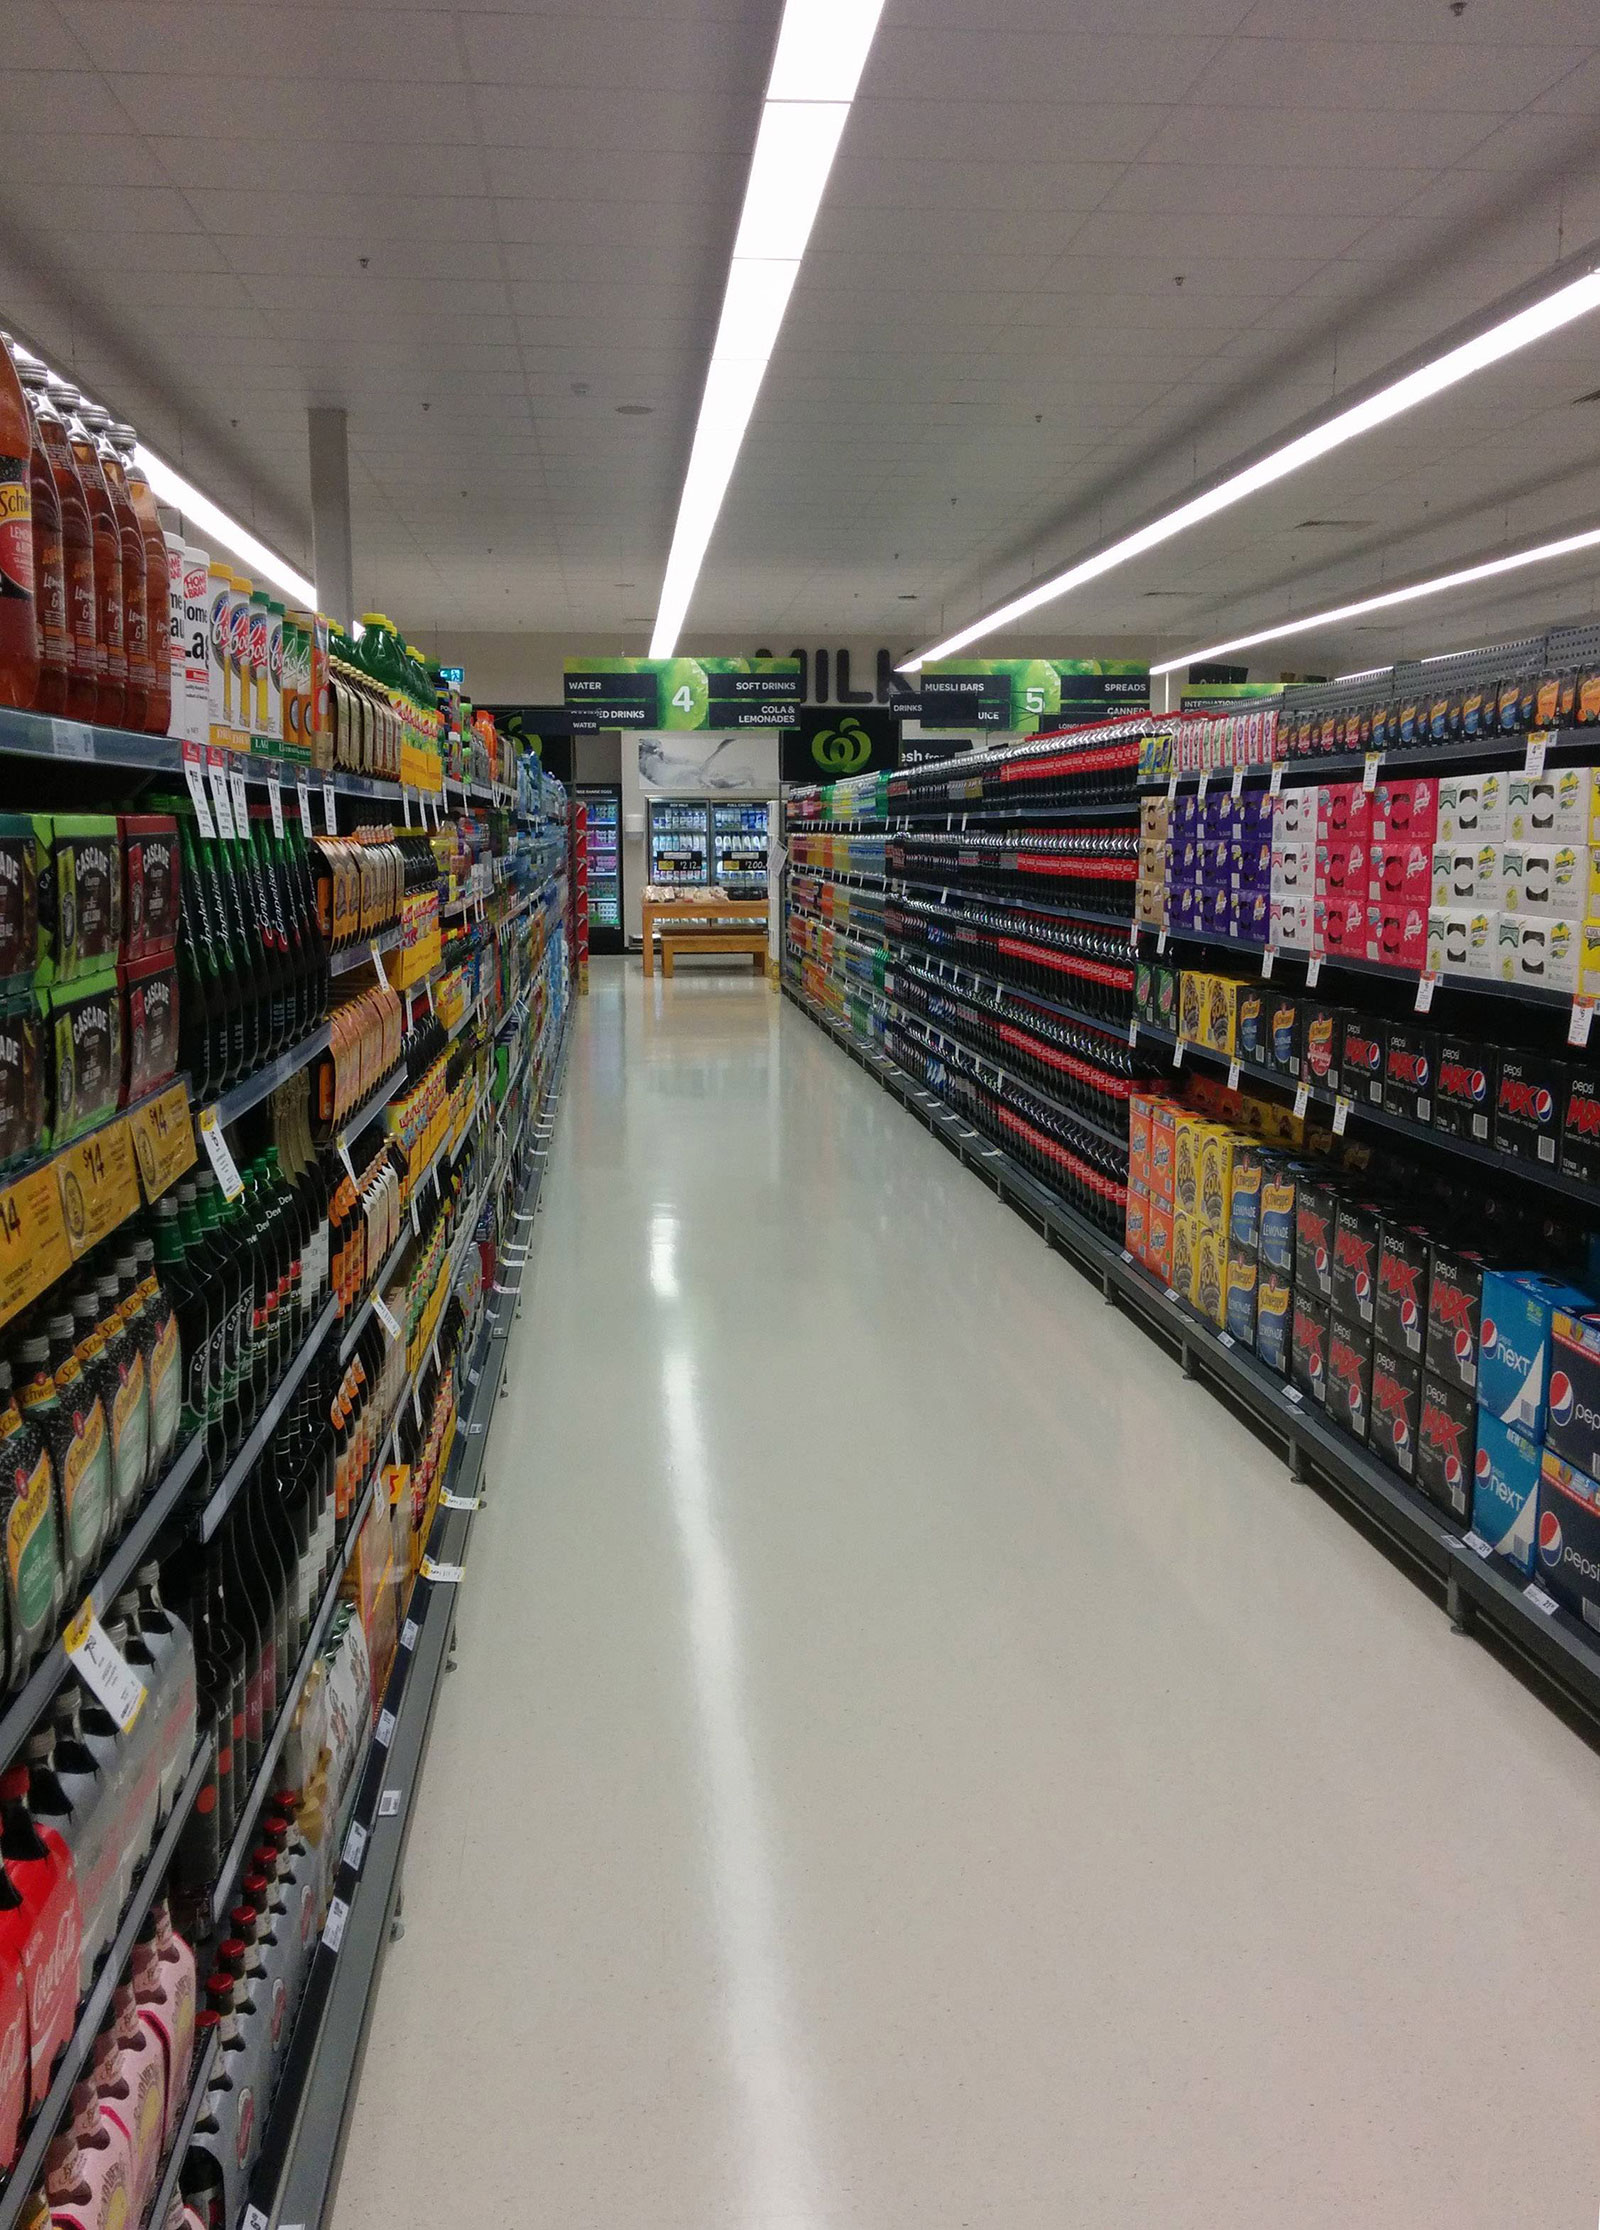 An exquisite grocery aisle.